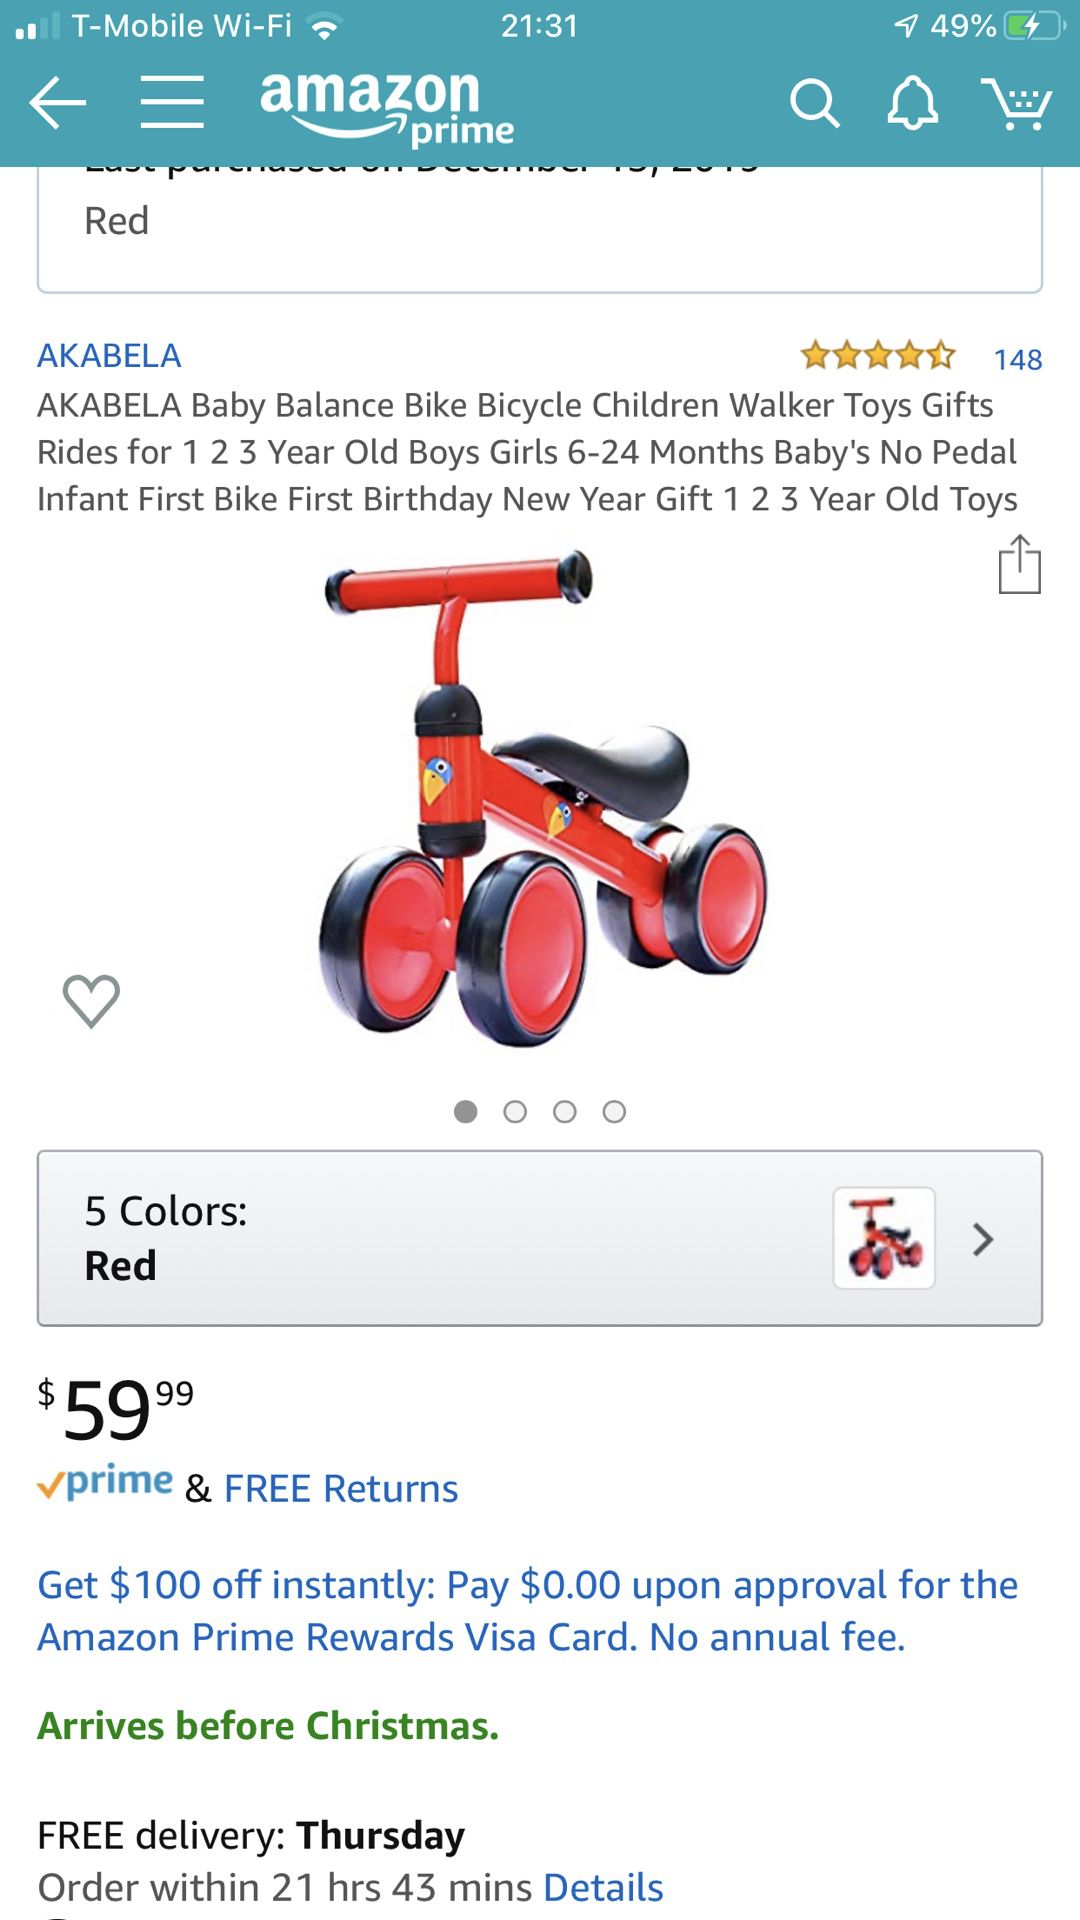 AKABELA Baby Balance Bike Bicycle Children Walker Toys Gifts Rides for 1 2 3 Year Old Boys Girls 6-24 Months Baby's No Pedal Infant First Bike First